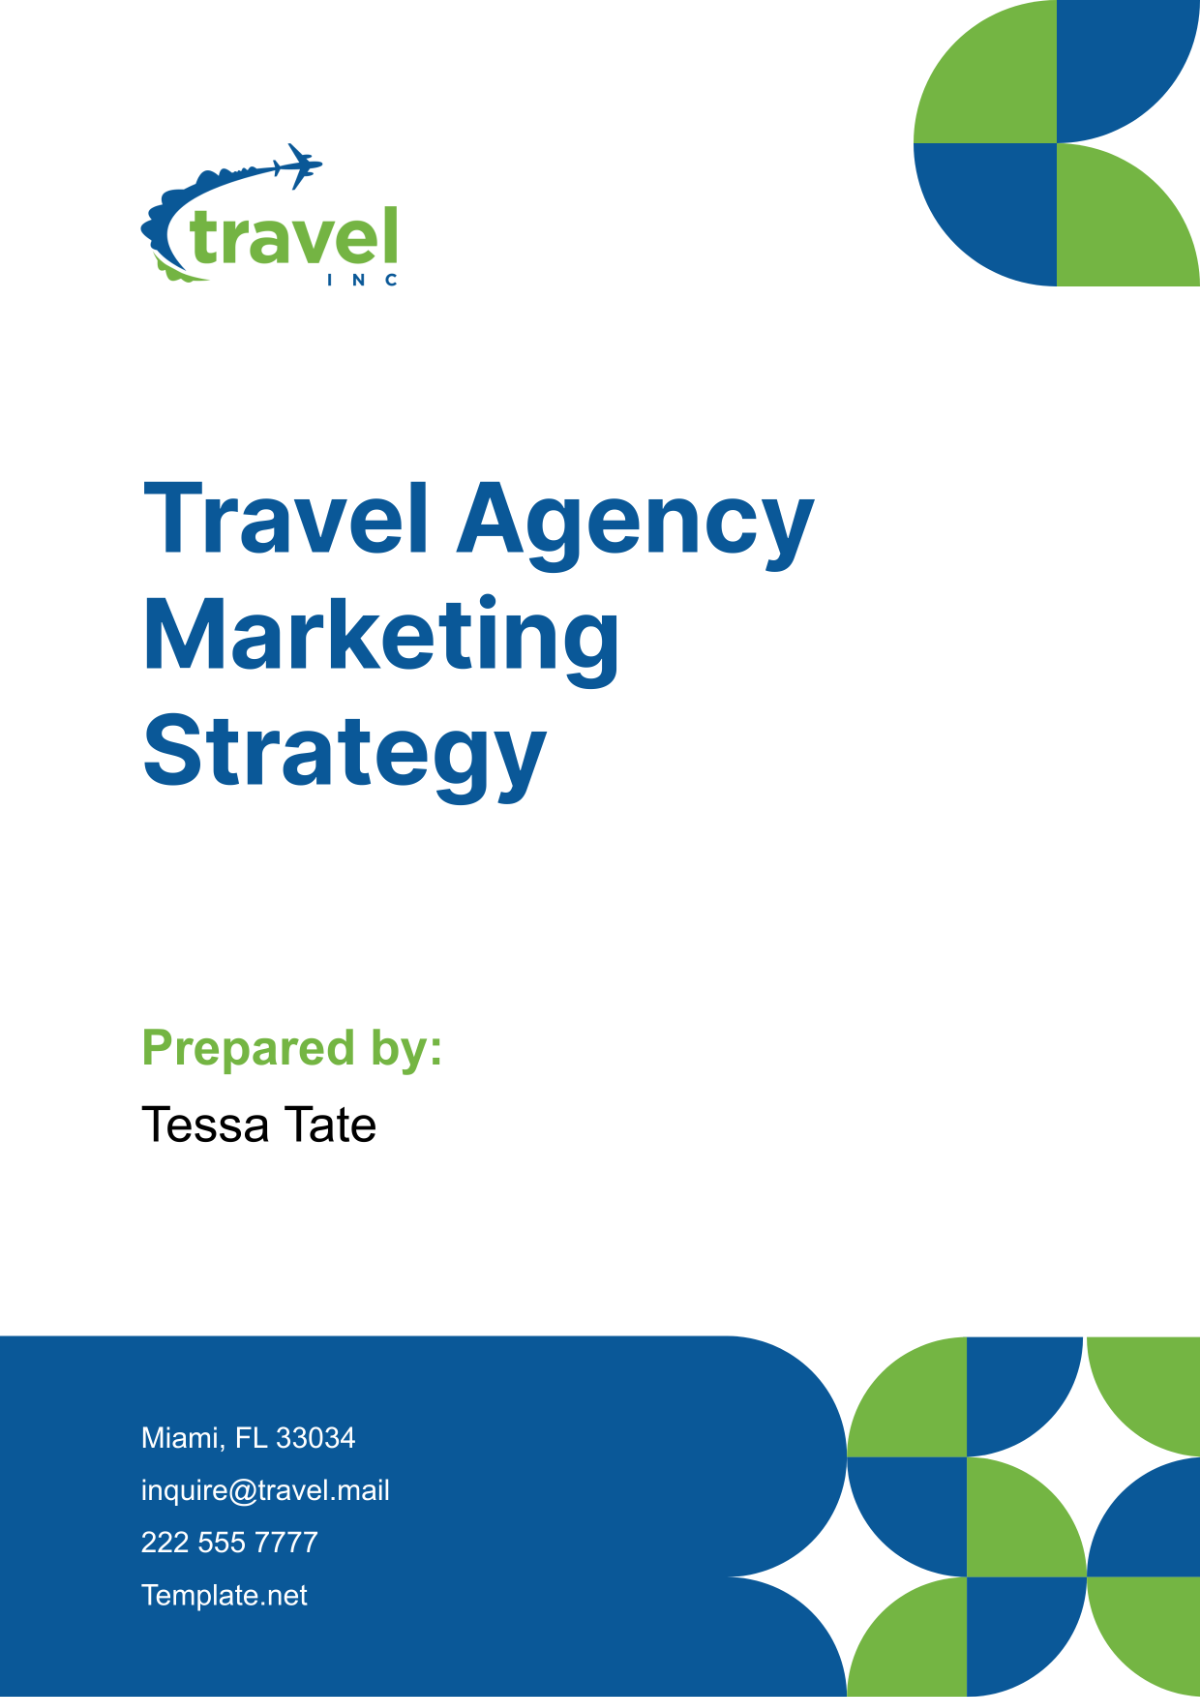 Travel Agency Marketing Strategy Template